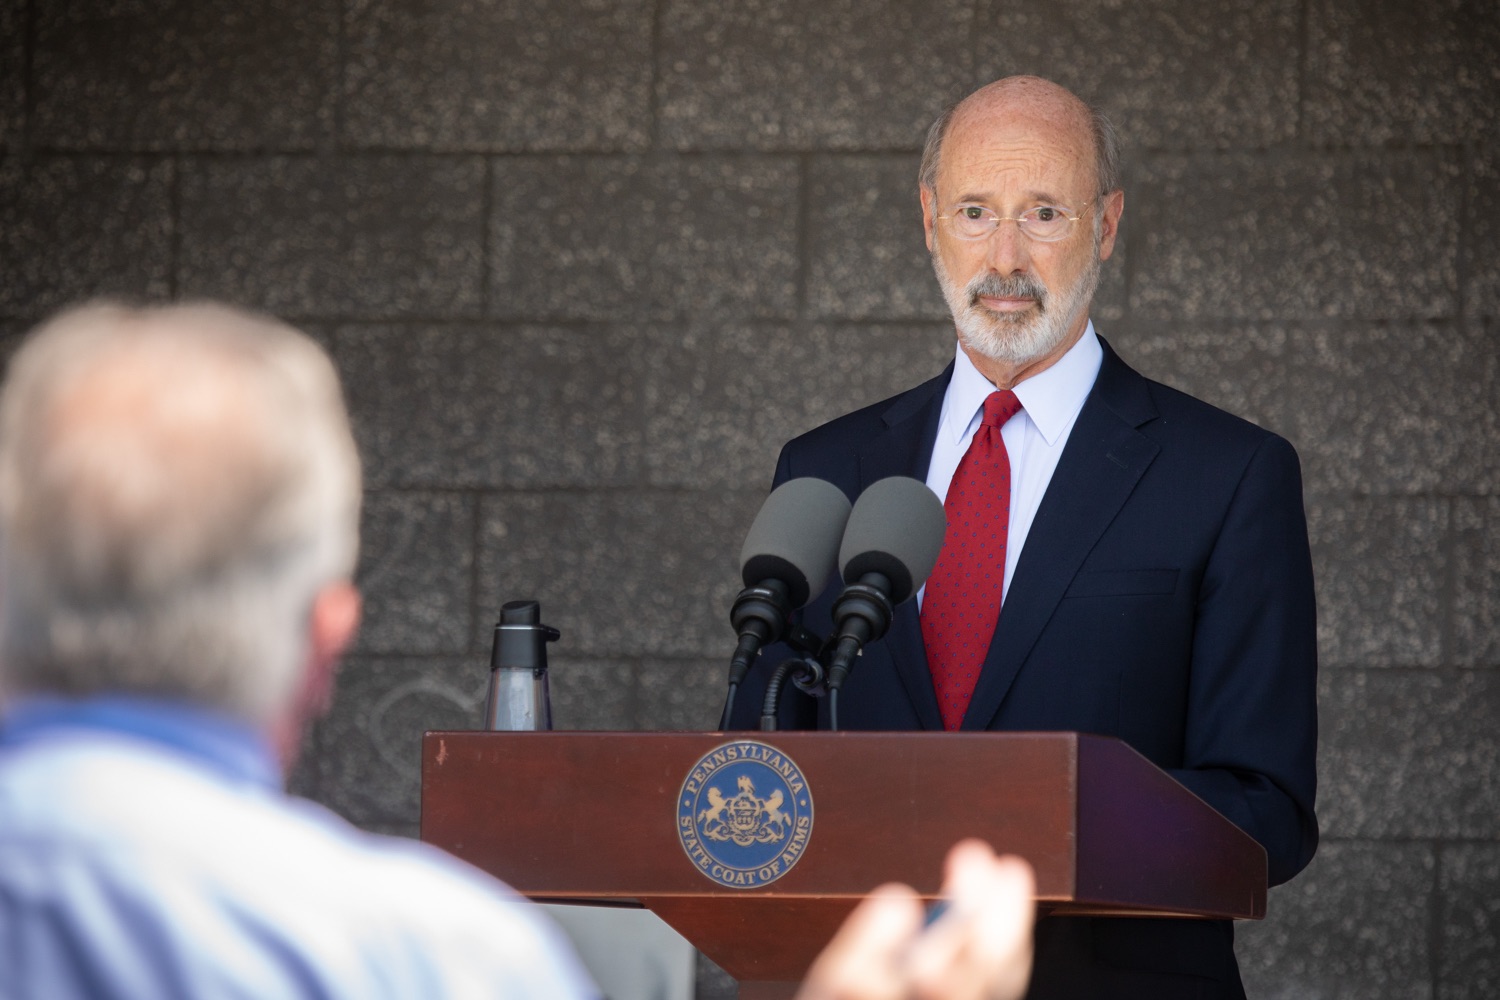 Pennsylvania Governor Tom Wolf speaking with the press.  Governor Tom Wolf visited the child care center at PSECU headquarters in Harrisburg today to announce $53 million in additional financial support for child care providers that have suffered during COVID-19.  Harrisburg, PA  July 6, 2020..<br><a href="https://filesource.amperwave.net/commonwealthofpa/photo/18143_gov_cares_dz_14.jpg" target="_blank">⇣ Download Photo</a>